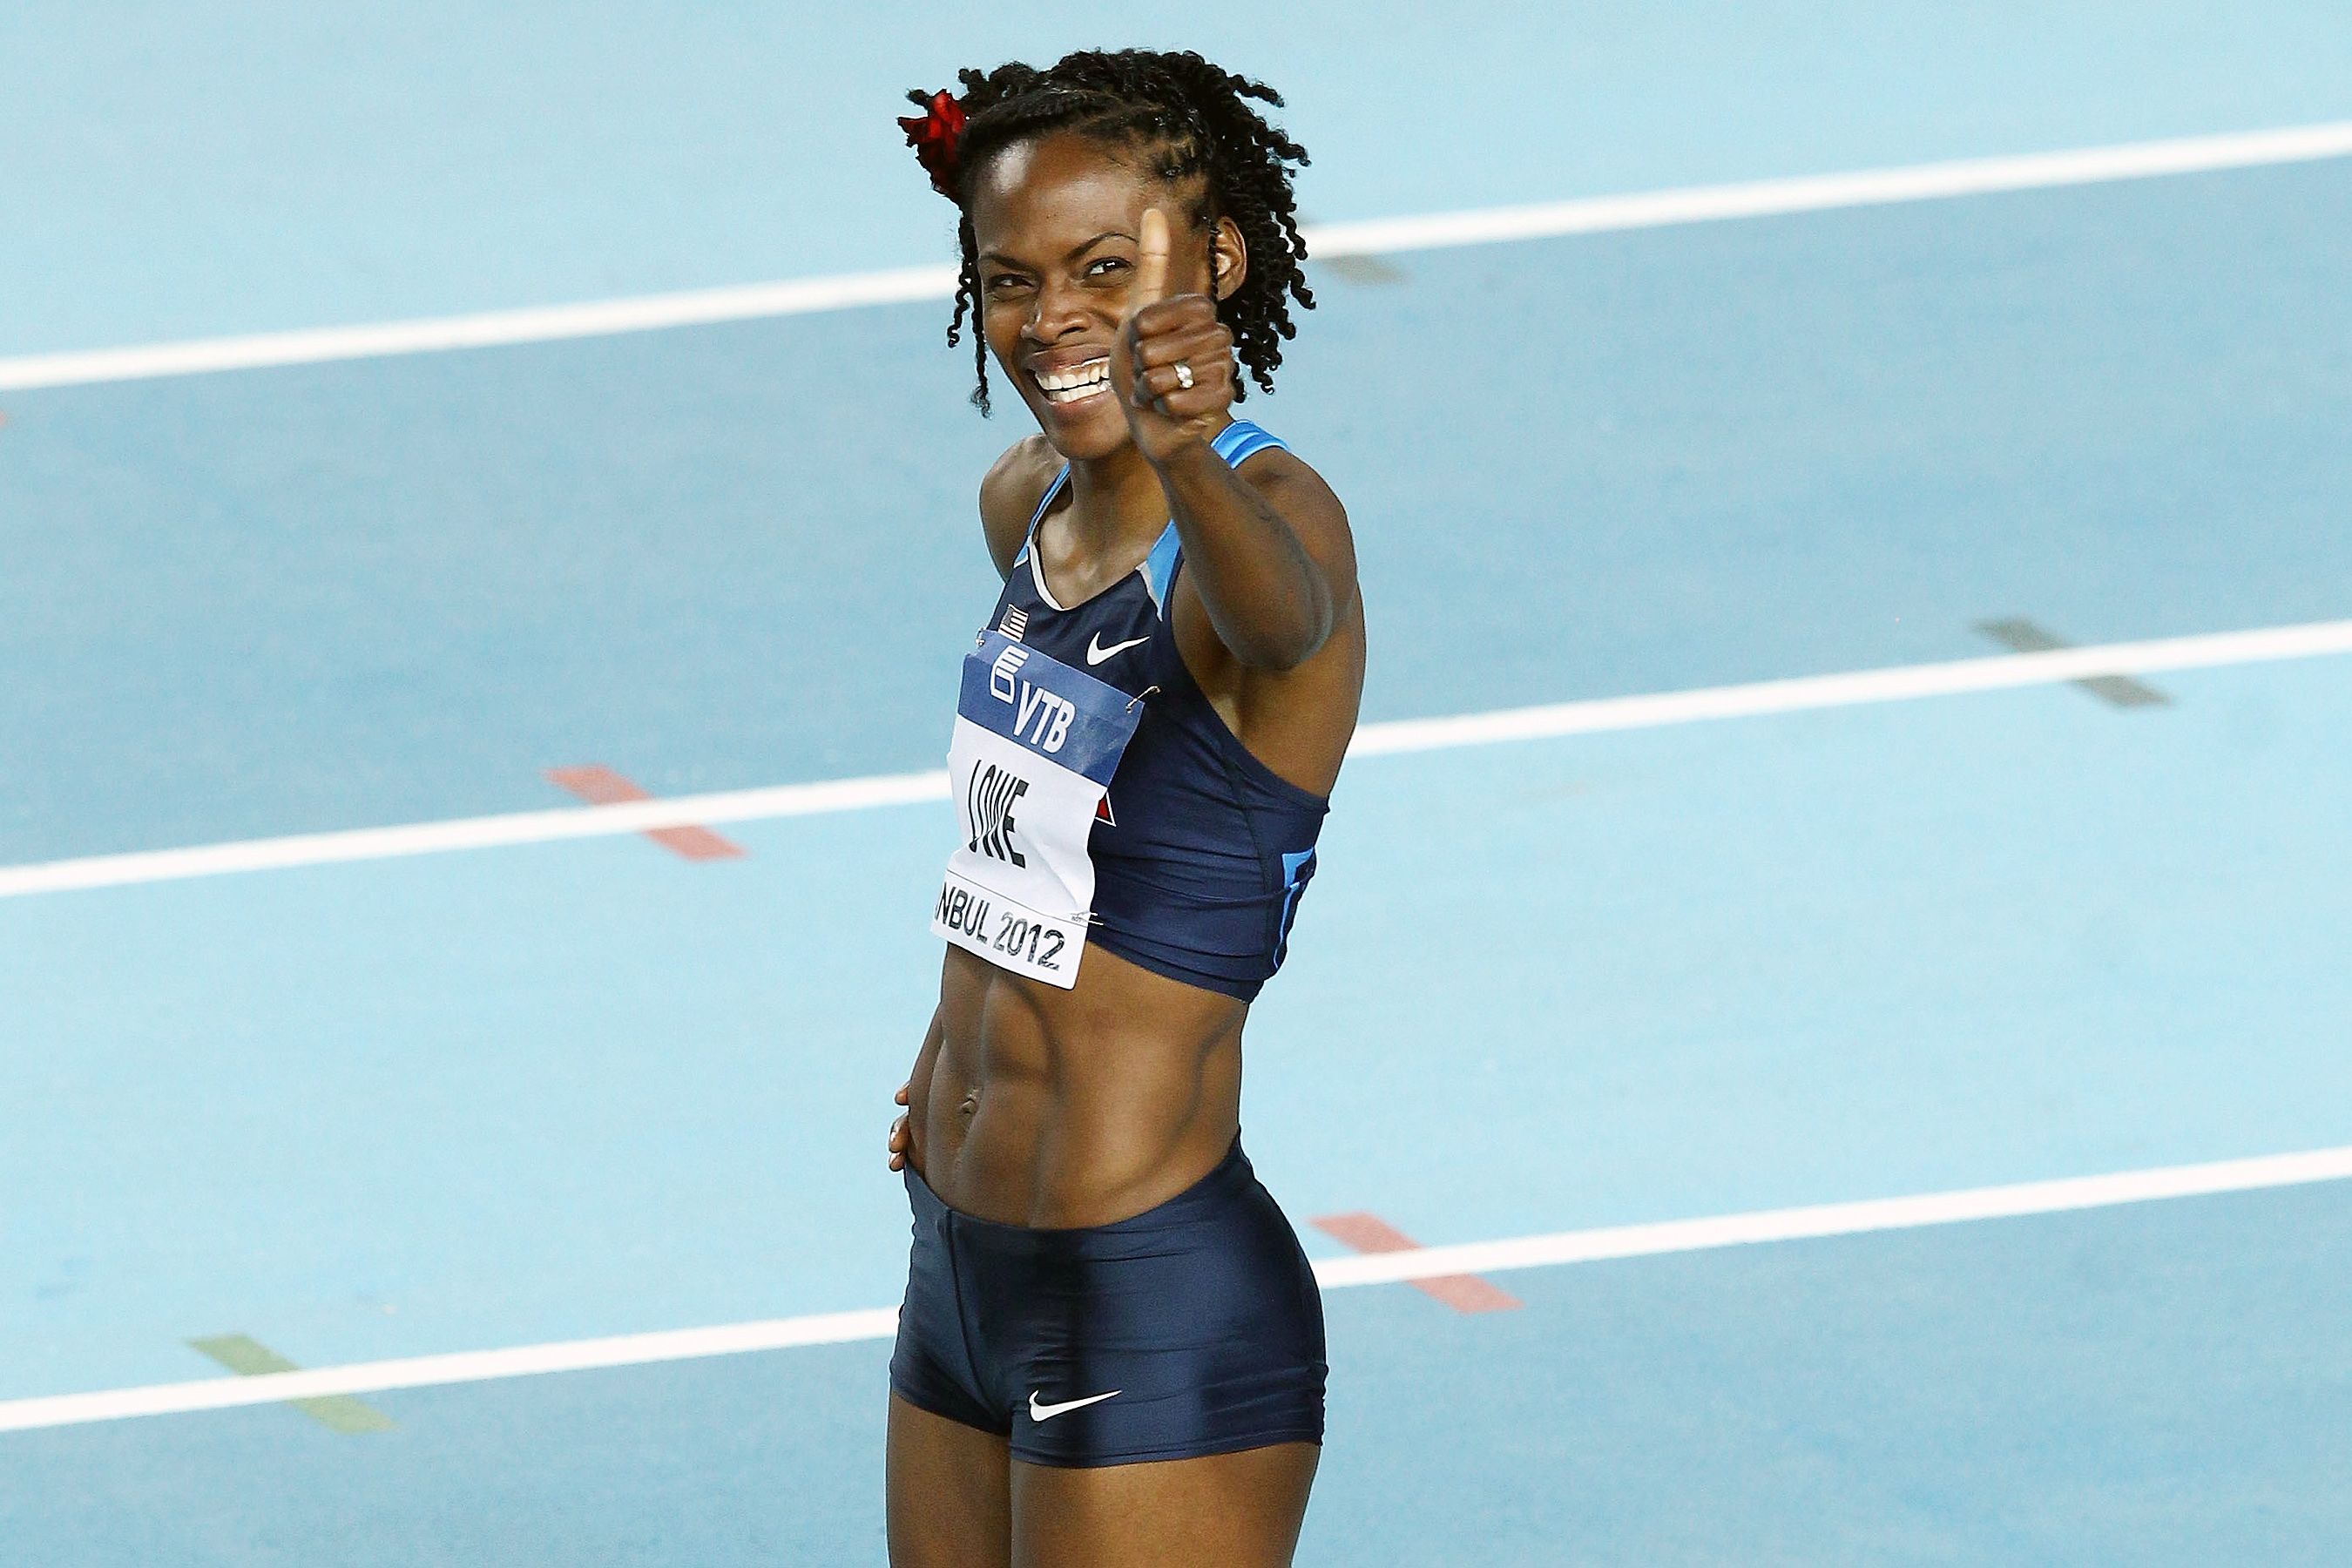 Chaunte Lowe at the 2012 World Indoor Championships in Istanbul